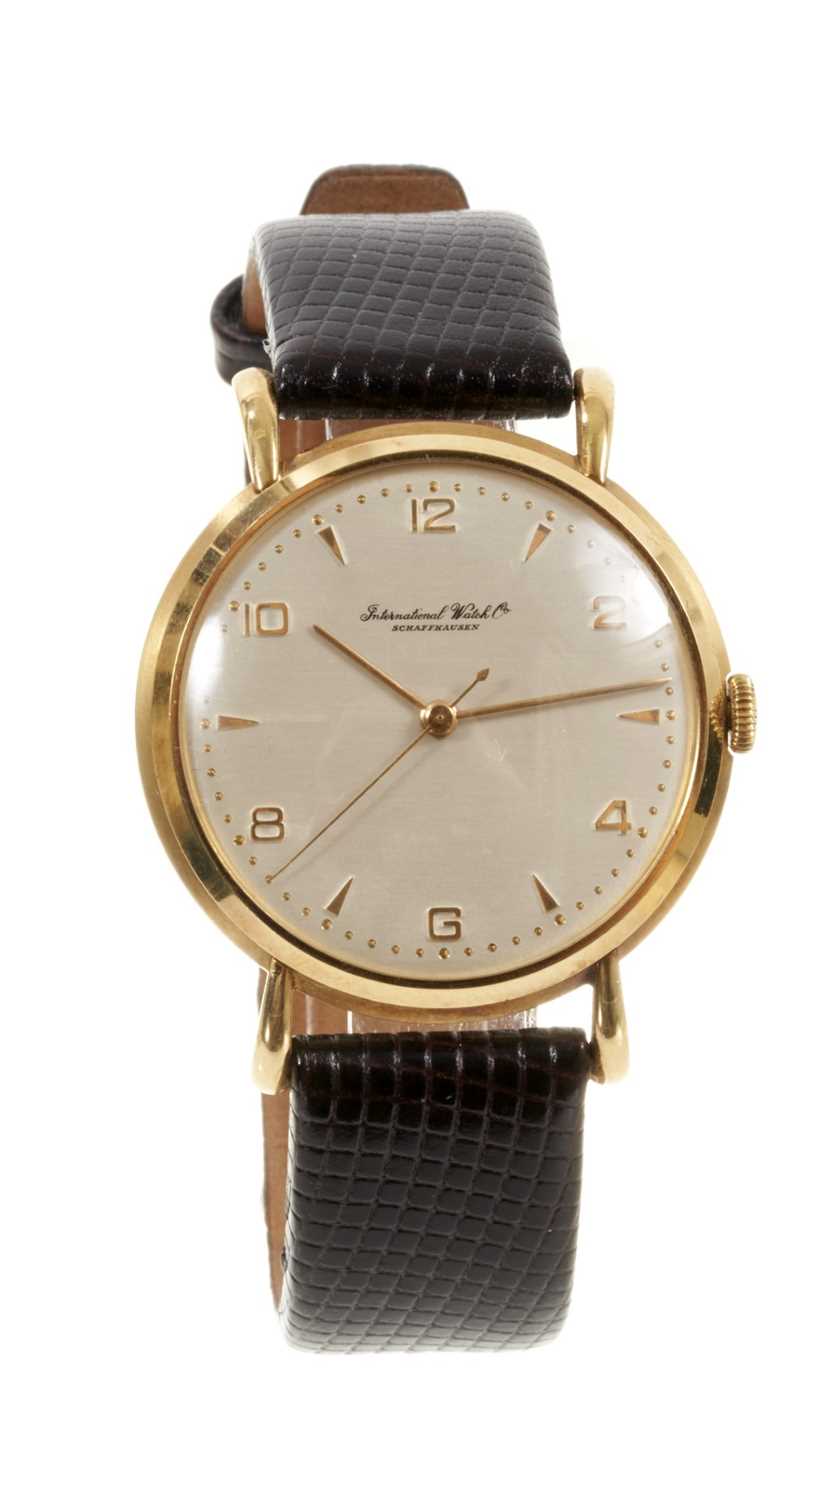 Lot 566 - 1940s IWC 18ct gold wristwatch with manual wind calibre 89 movement, circa 1948.